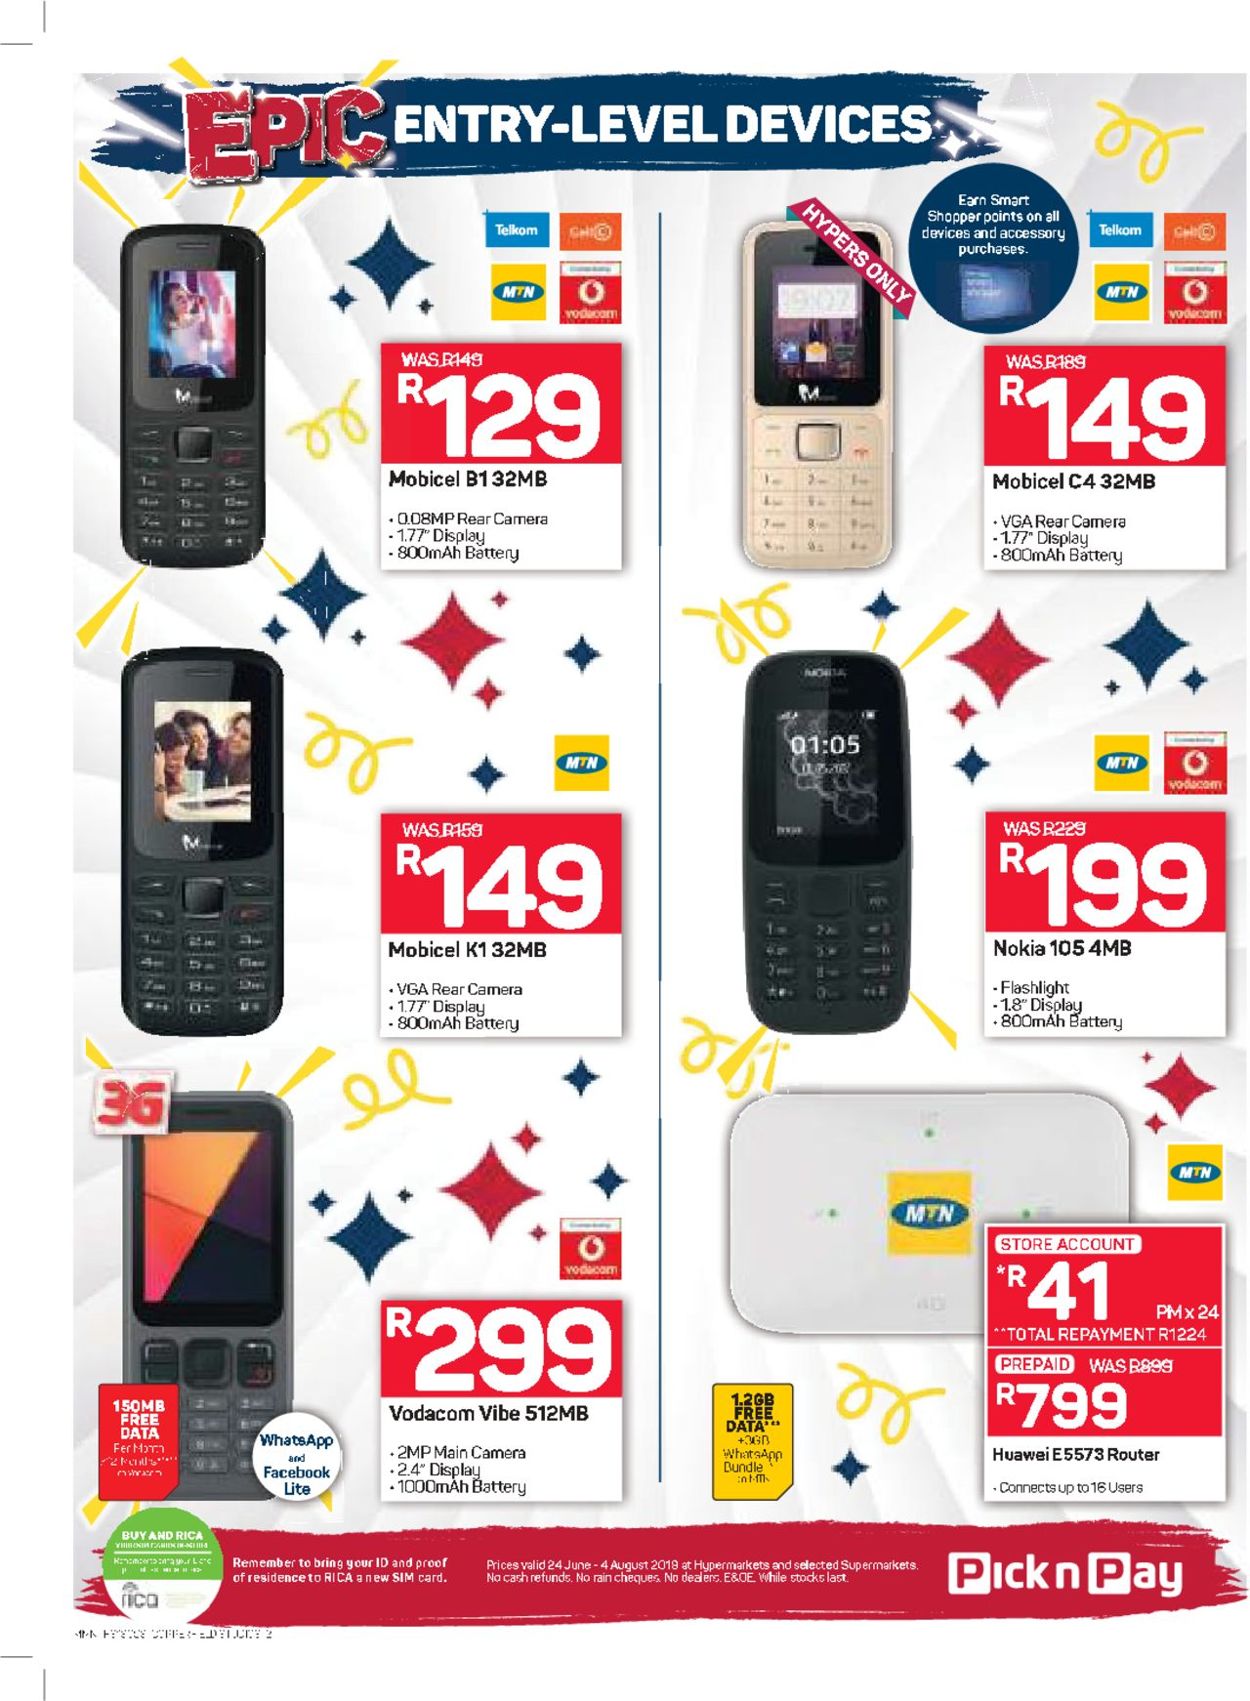 Pick n Pay Catalogue - 2019/06/24-2019/08/04 (Page 2)